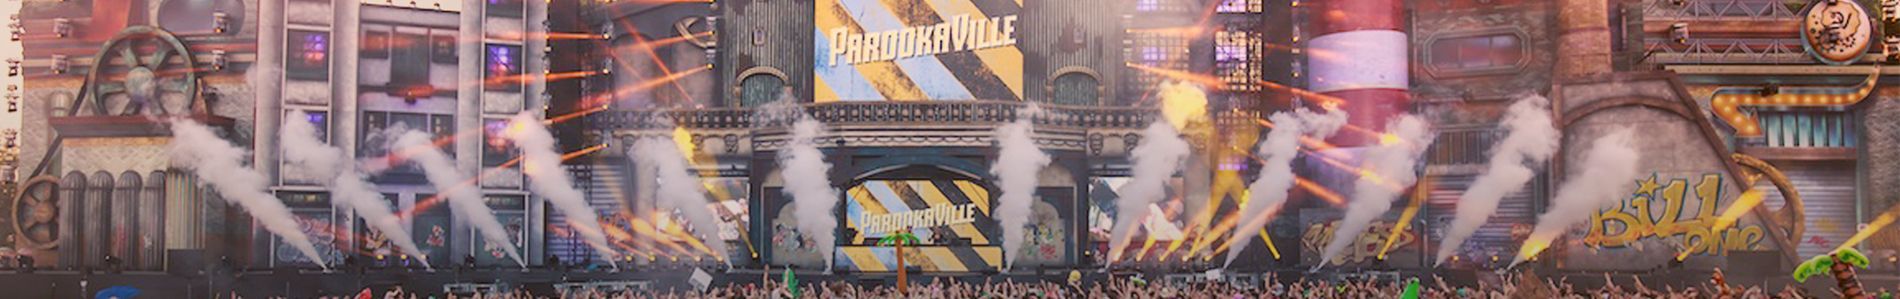 Spinnin' Sessions Spinnin' Sessions x Parookaville 2017